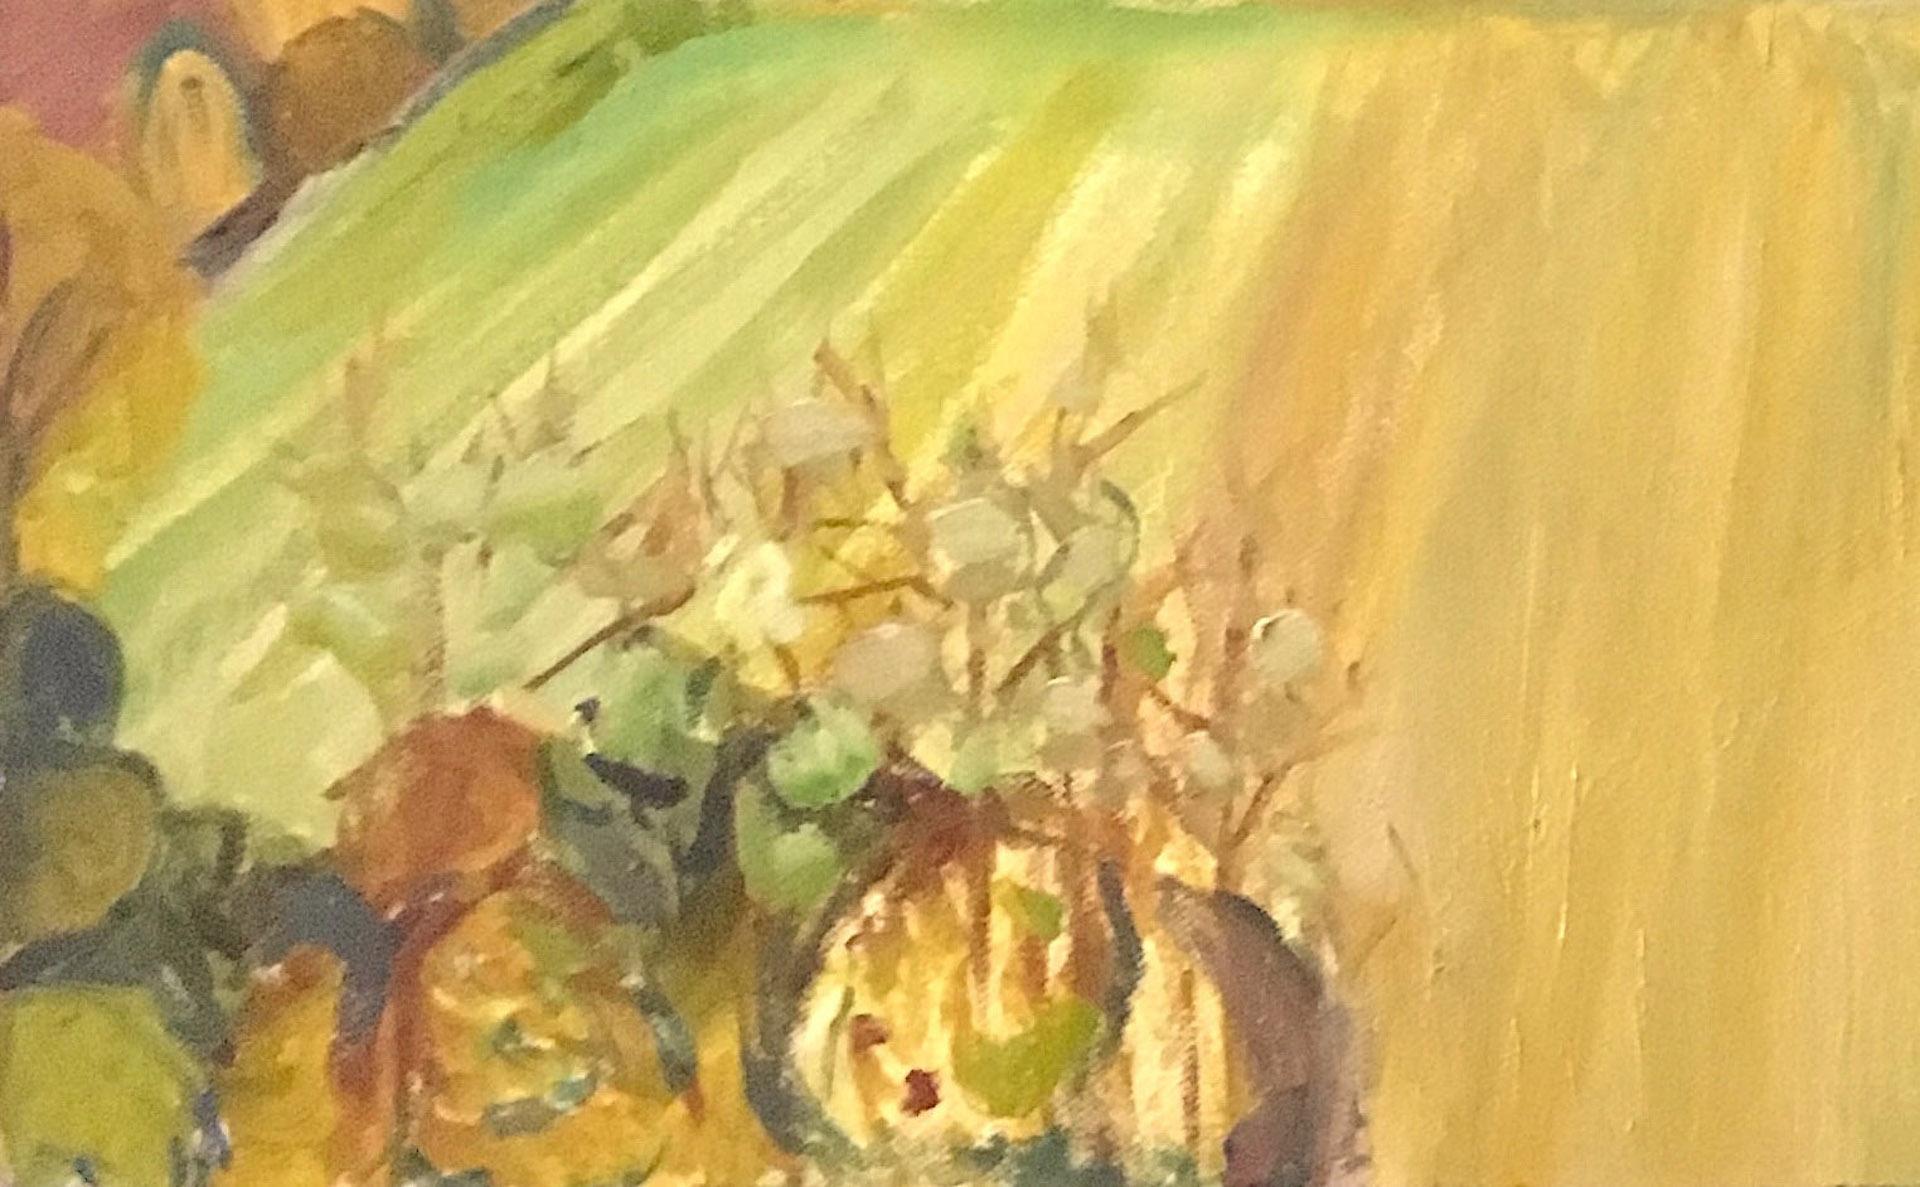 Eleanor Woolley
Fruit fields
Original Naive Painting
Oil Paint on Canvas
Canvas Size: H 50.8cm x W 76.2cm x D 2cm
Sold Unframed
Ready to Hang
Please note that insitu images are purely an indication of how a piece may look.

Fruit fields is an